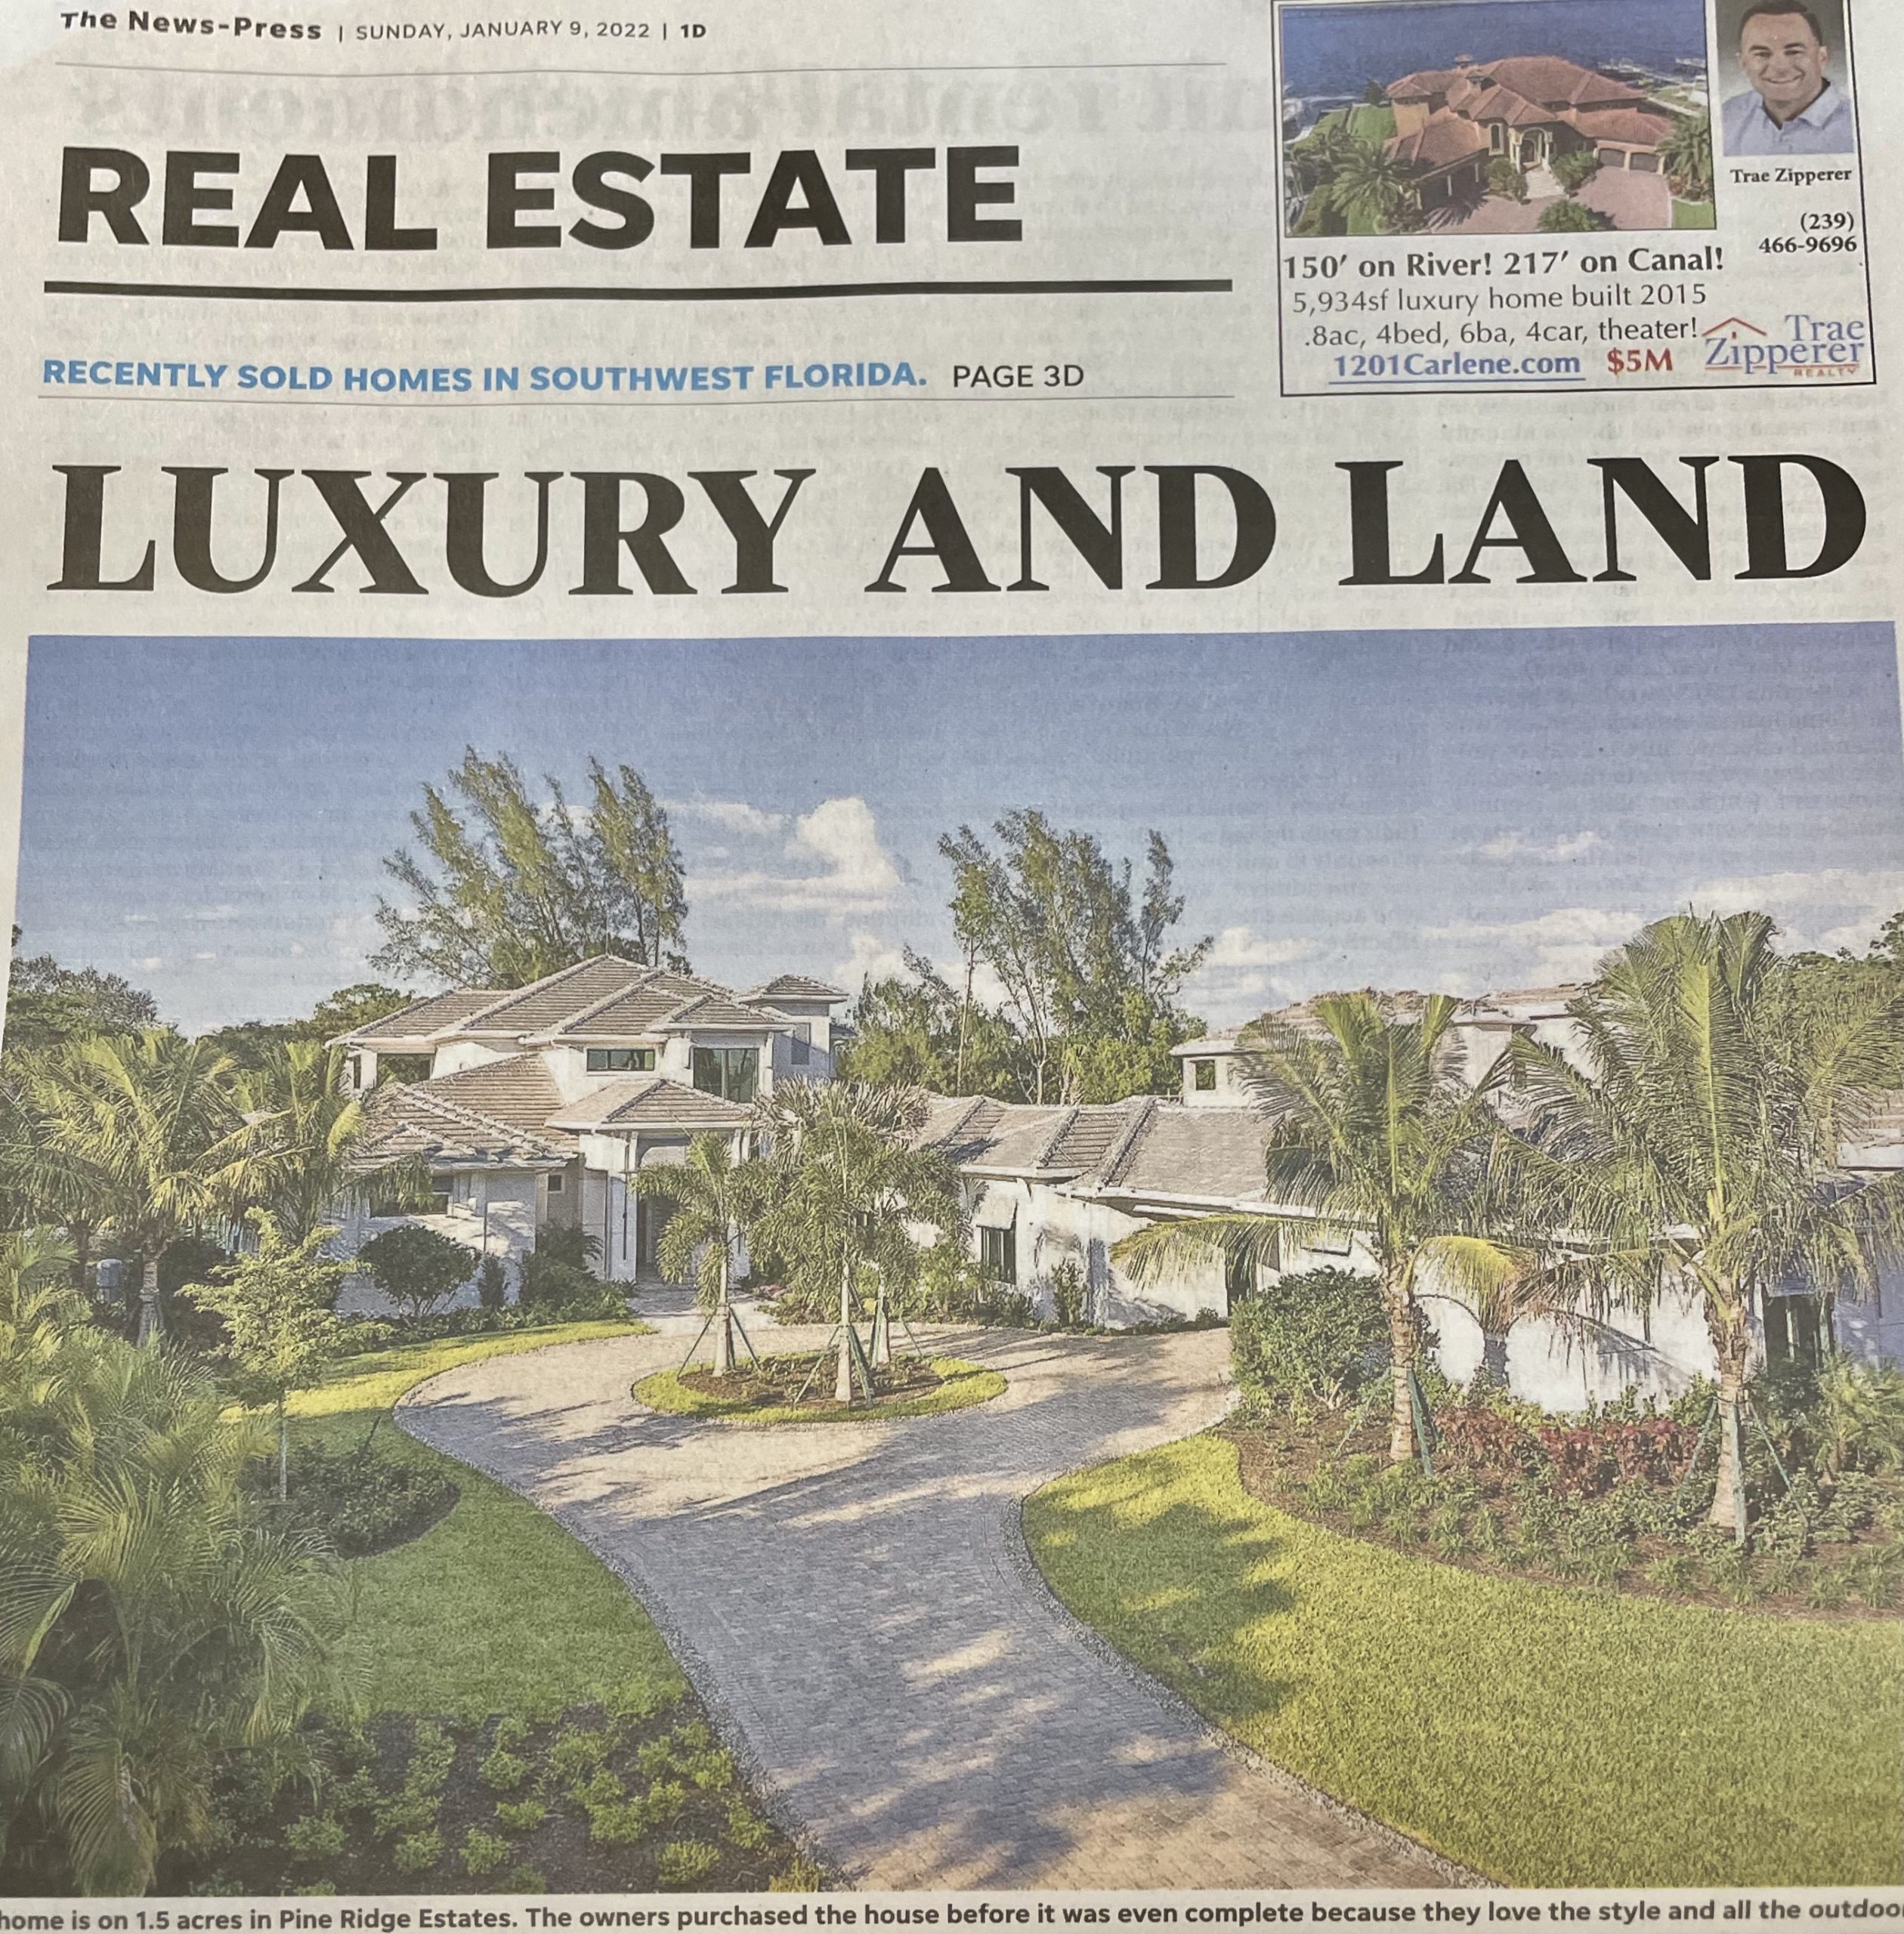 One The Cover of The News-Press Real Estate Section